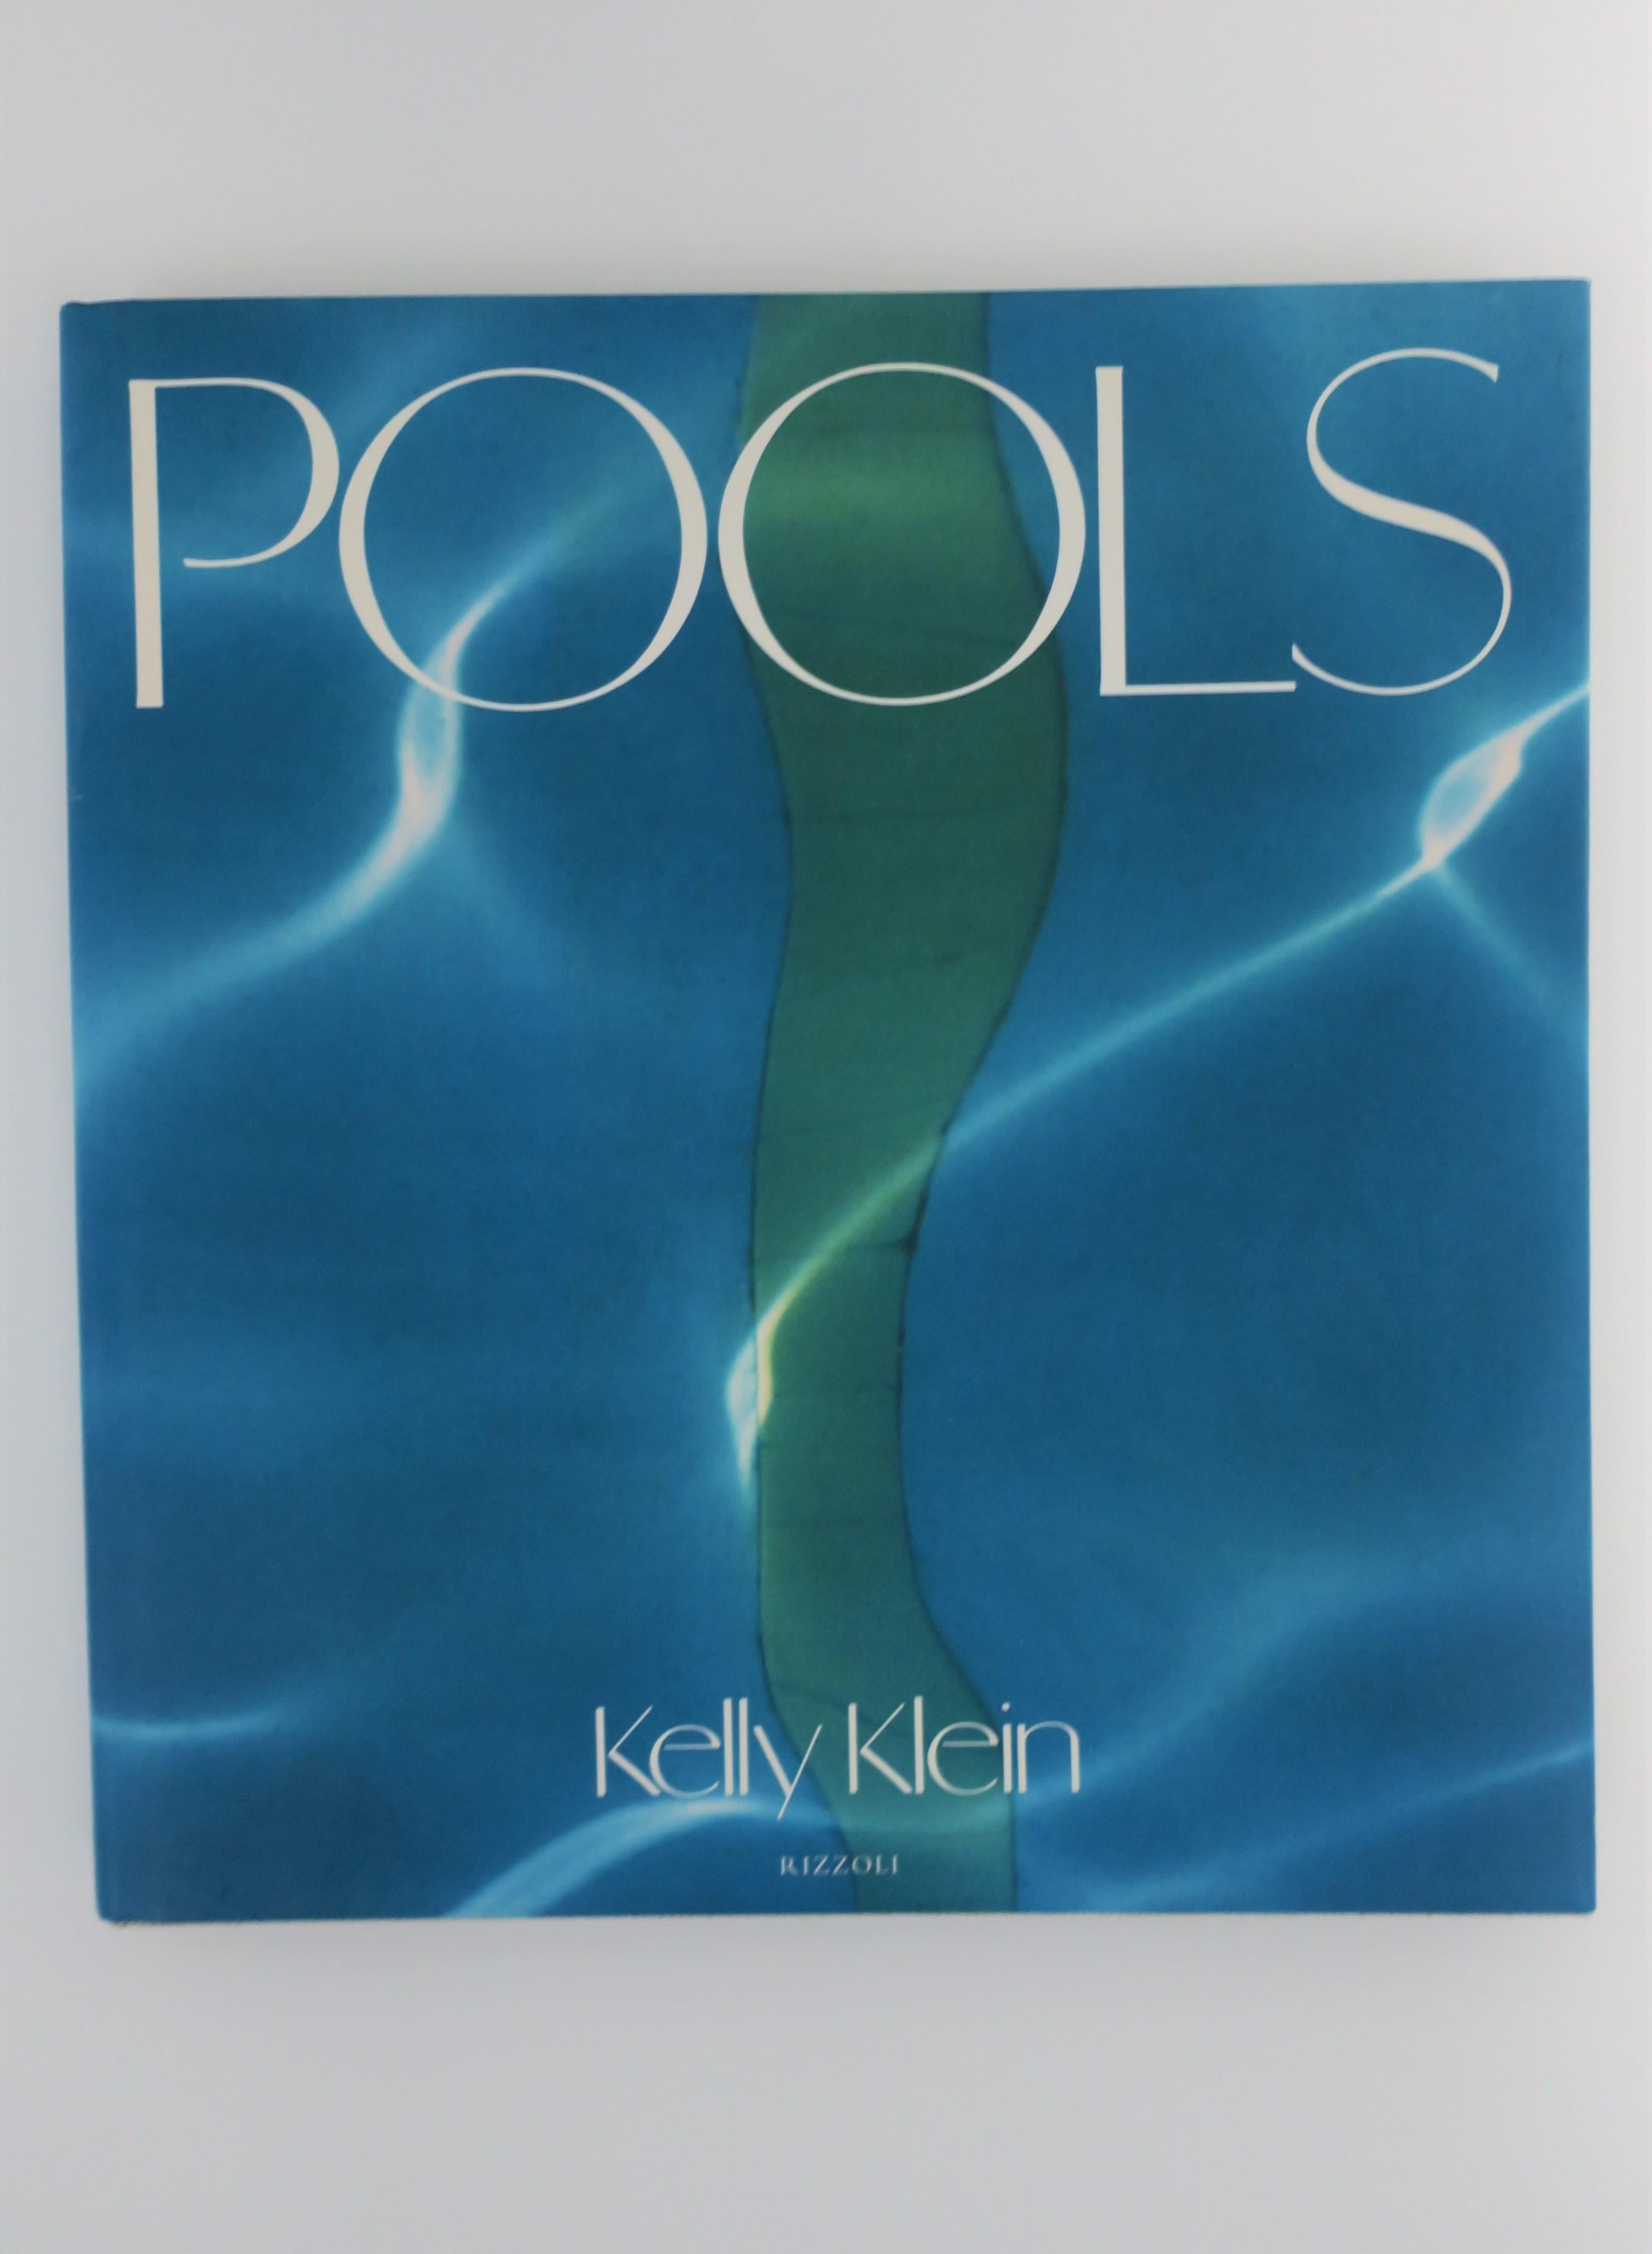 This is a very beautiful and inspiring coffee table or library book by Kelly Klein, featuring iconic and unique photographs of swimming pools, in all their forms, from around the world. From Florida's Miami to North Africa's Tangiers, it captures